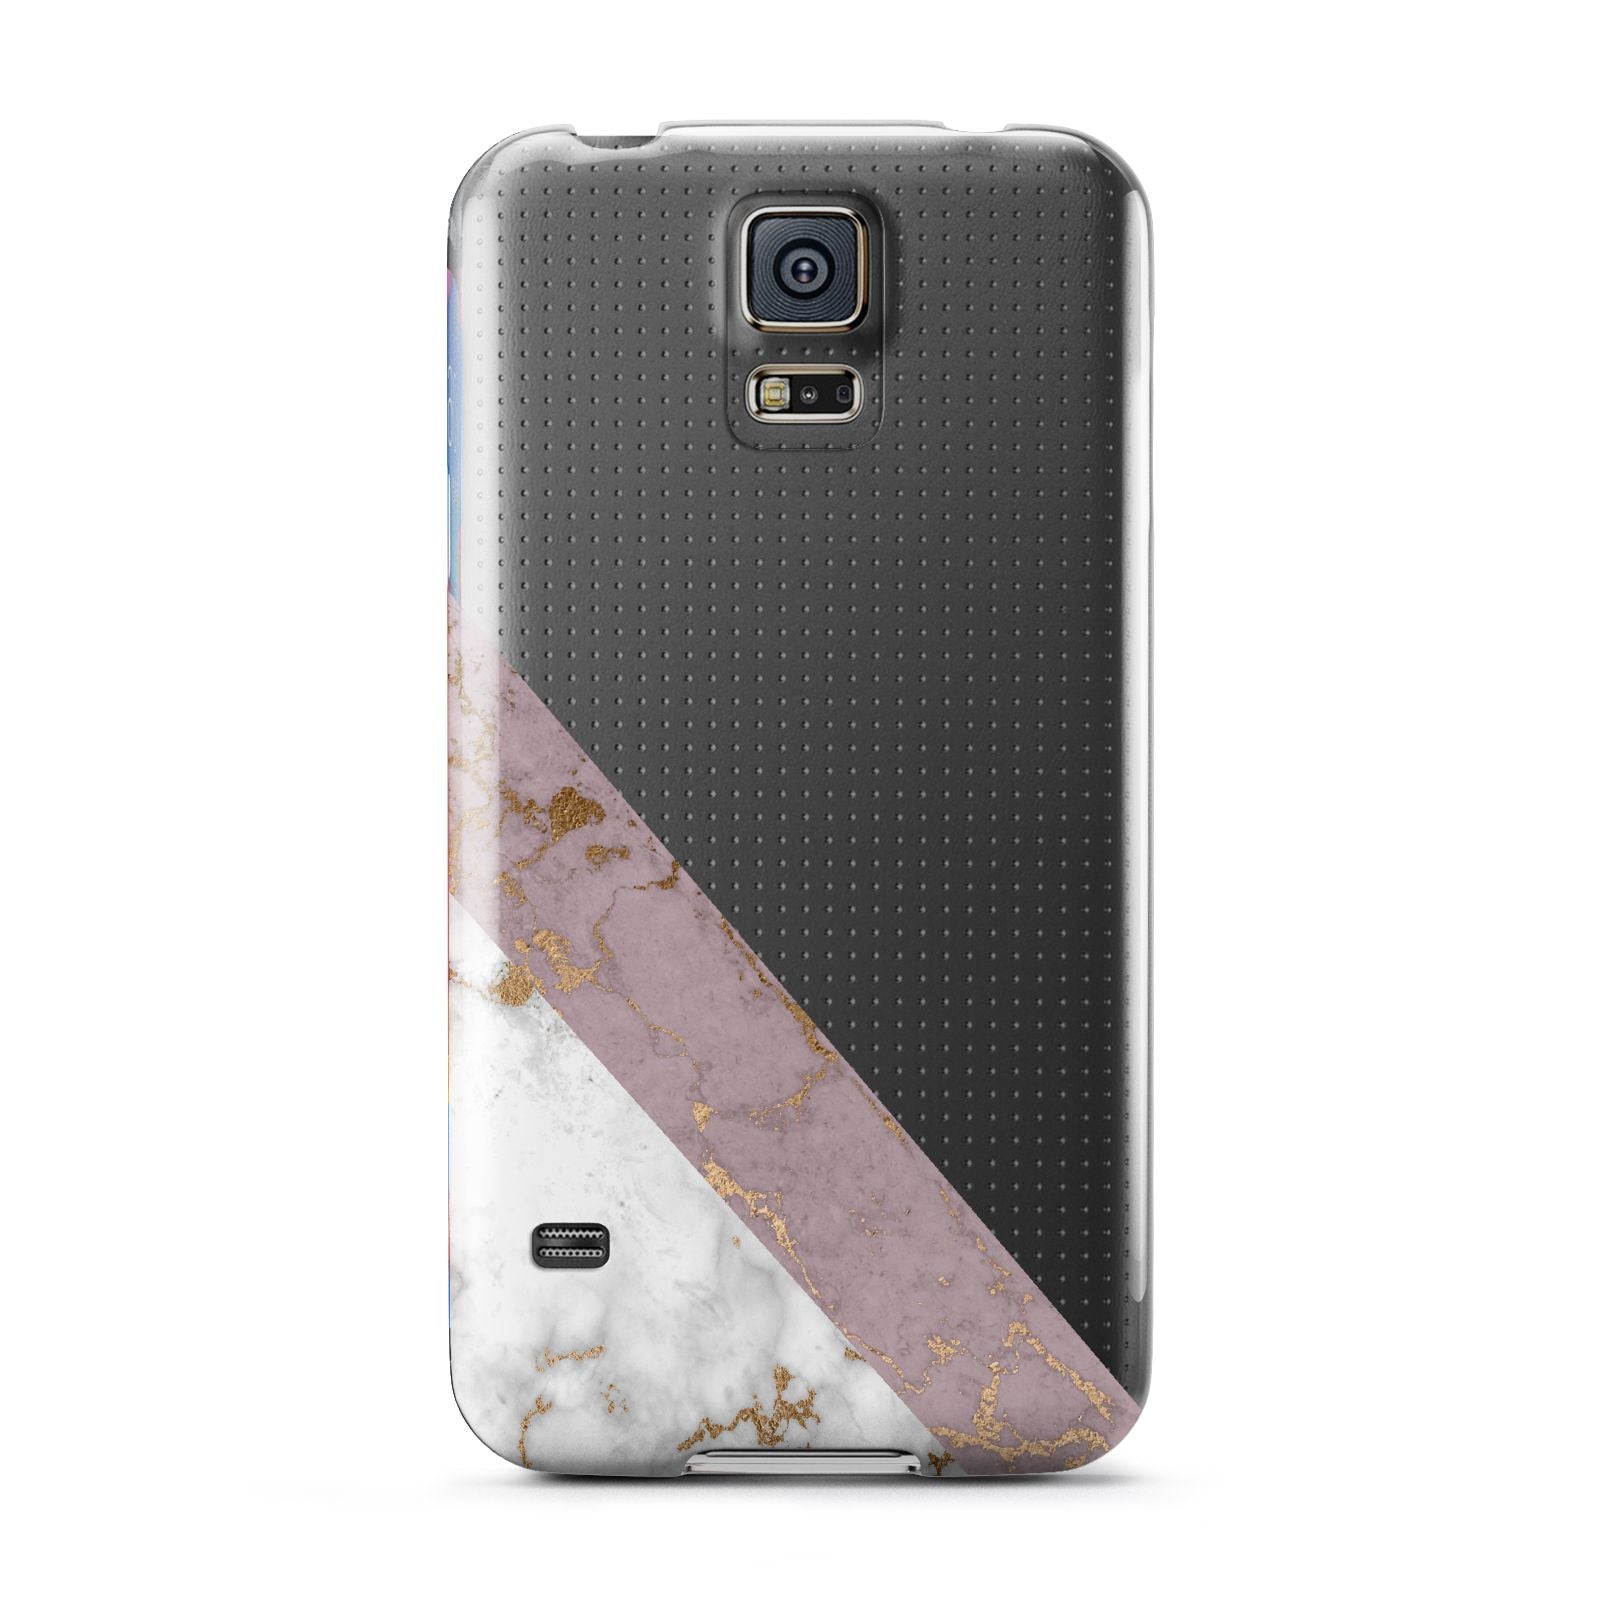 Transparent Pink and White Marble Samsung Galaxy S5 Case